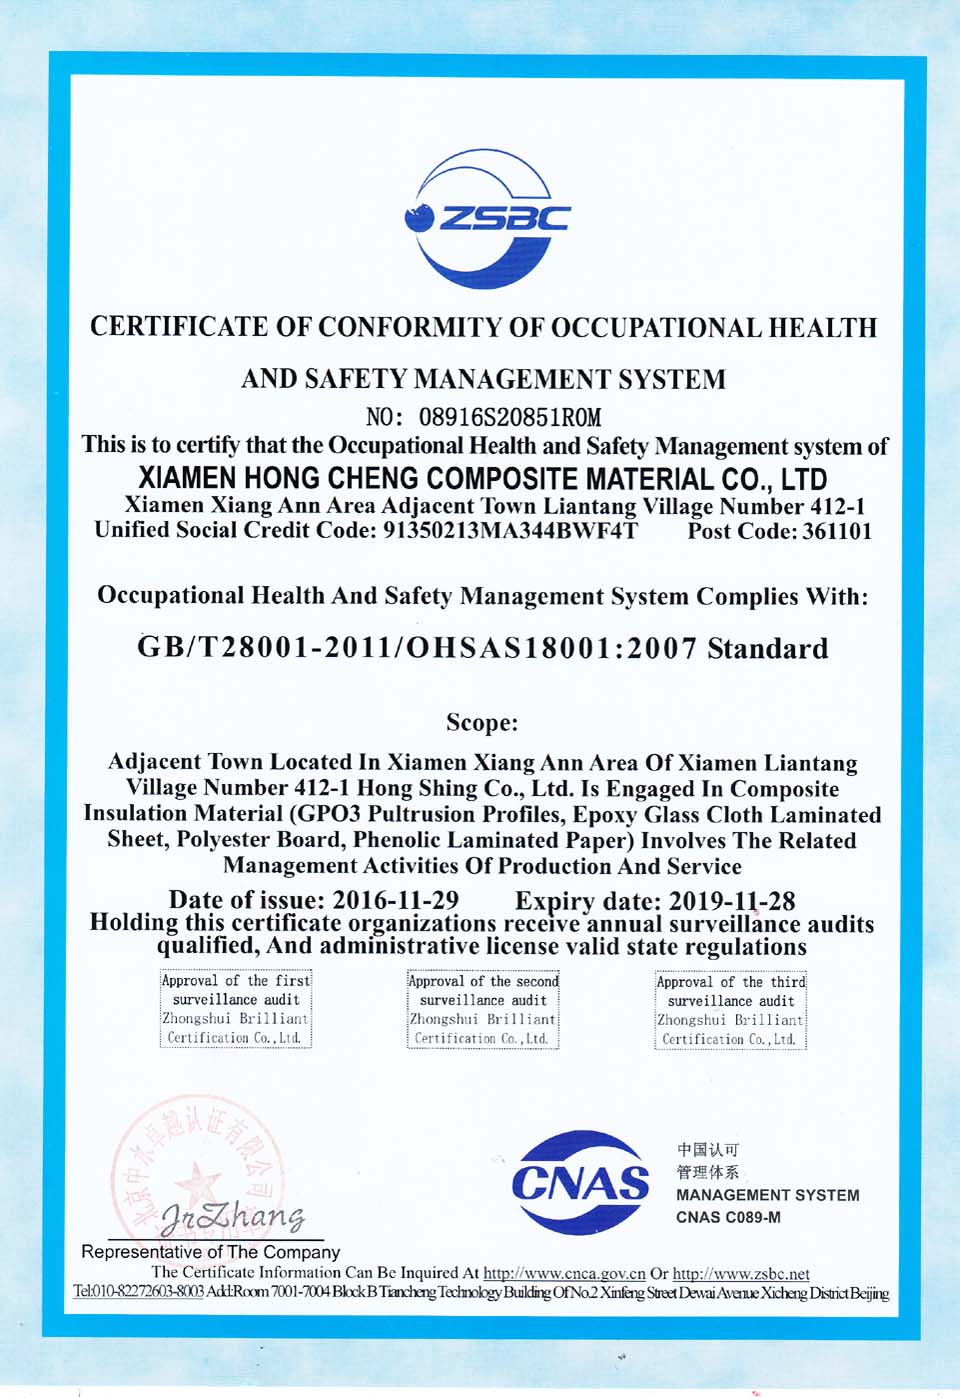 Certificate of corformity of occupational health and safety management system